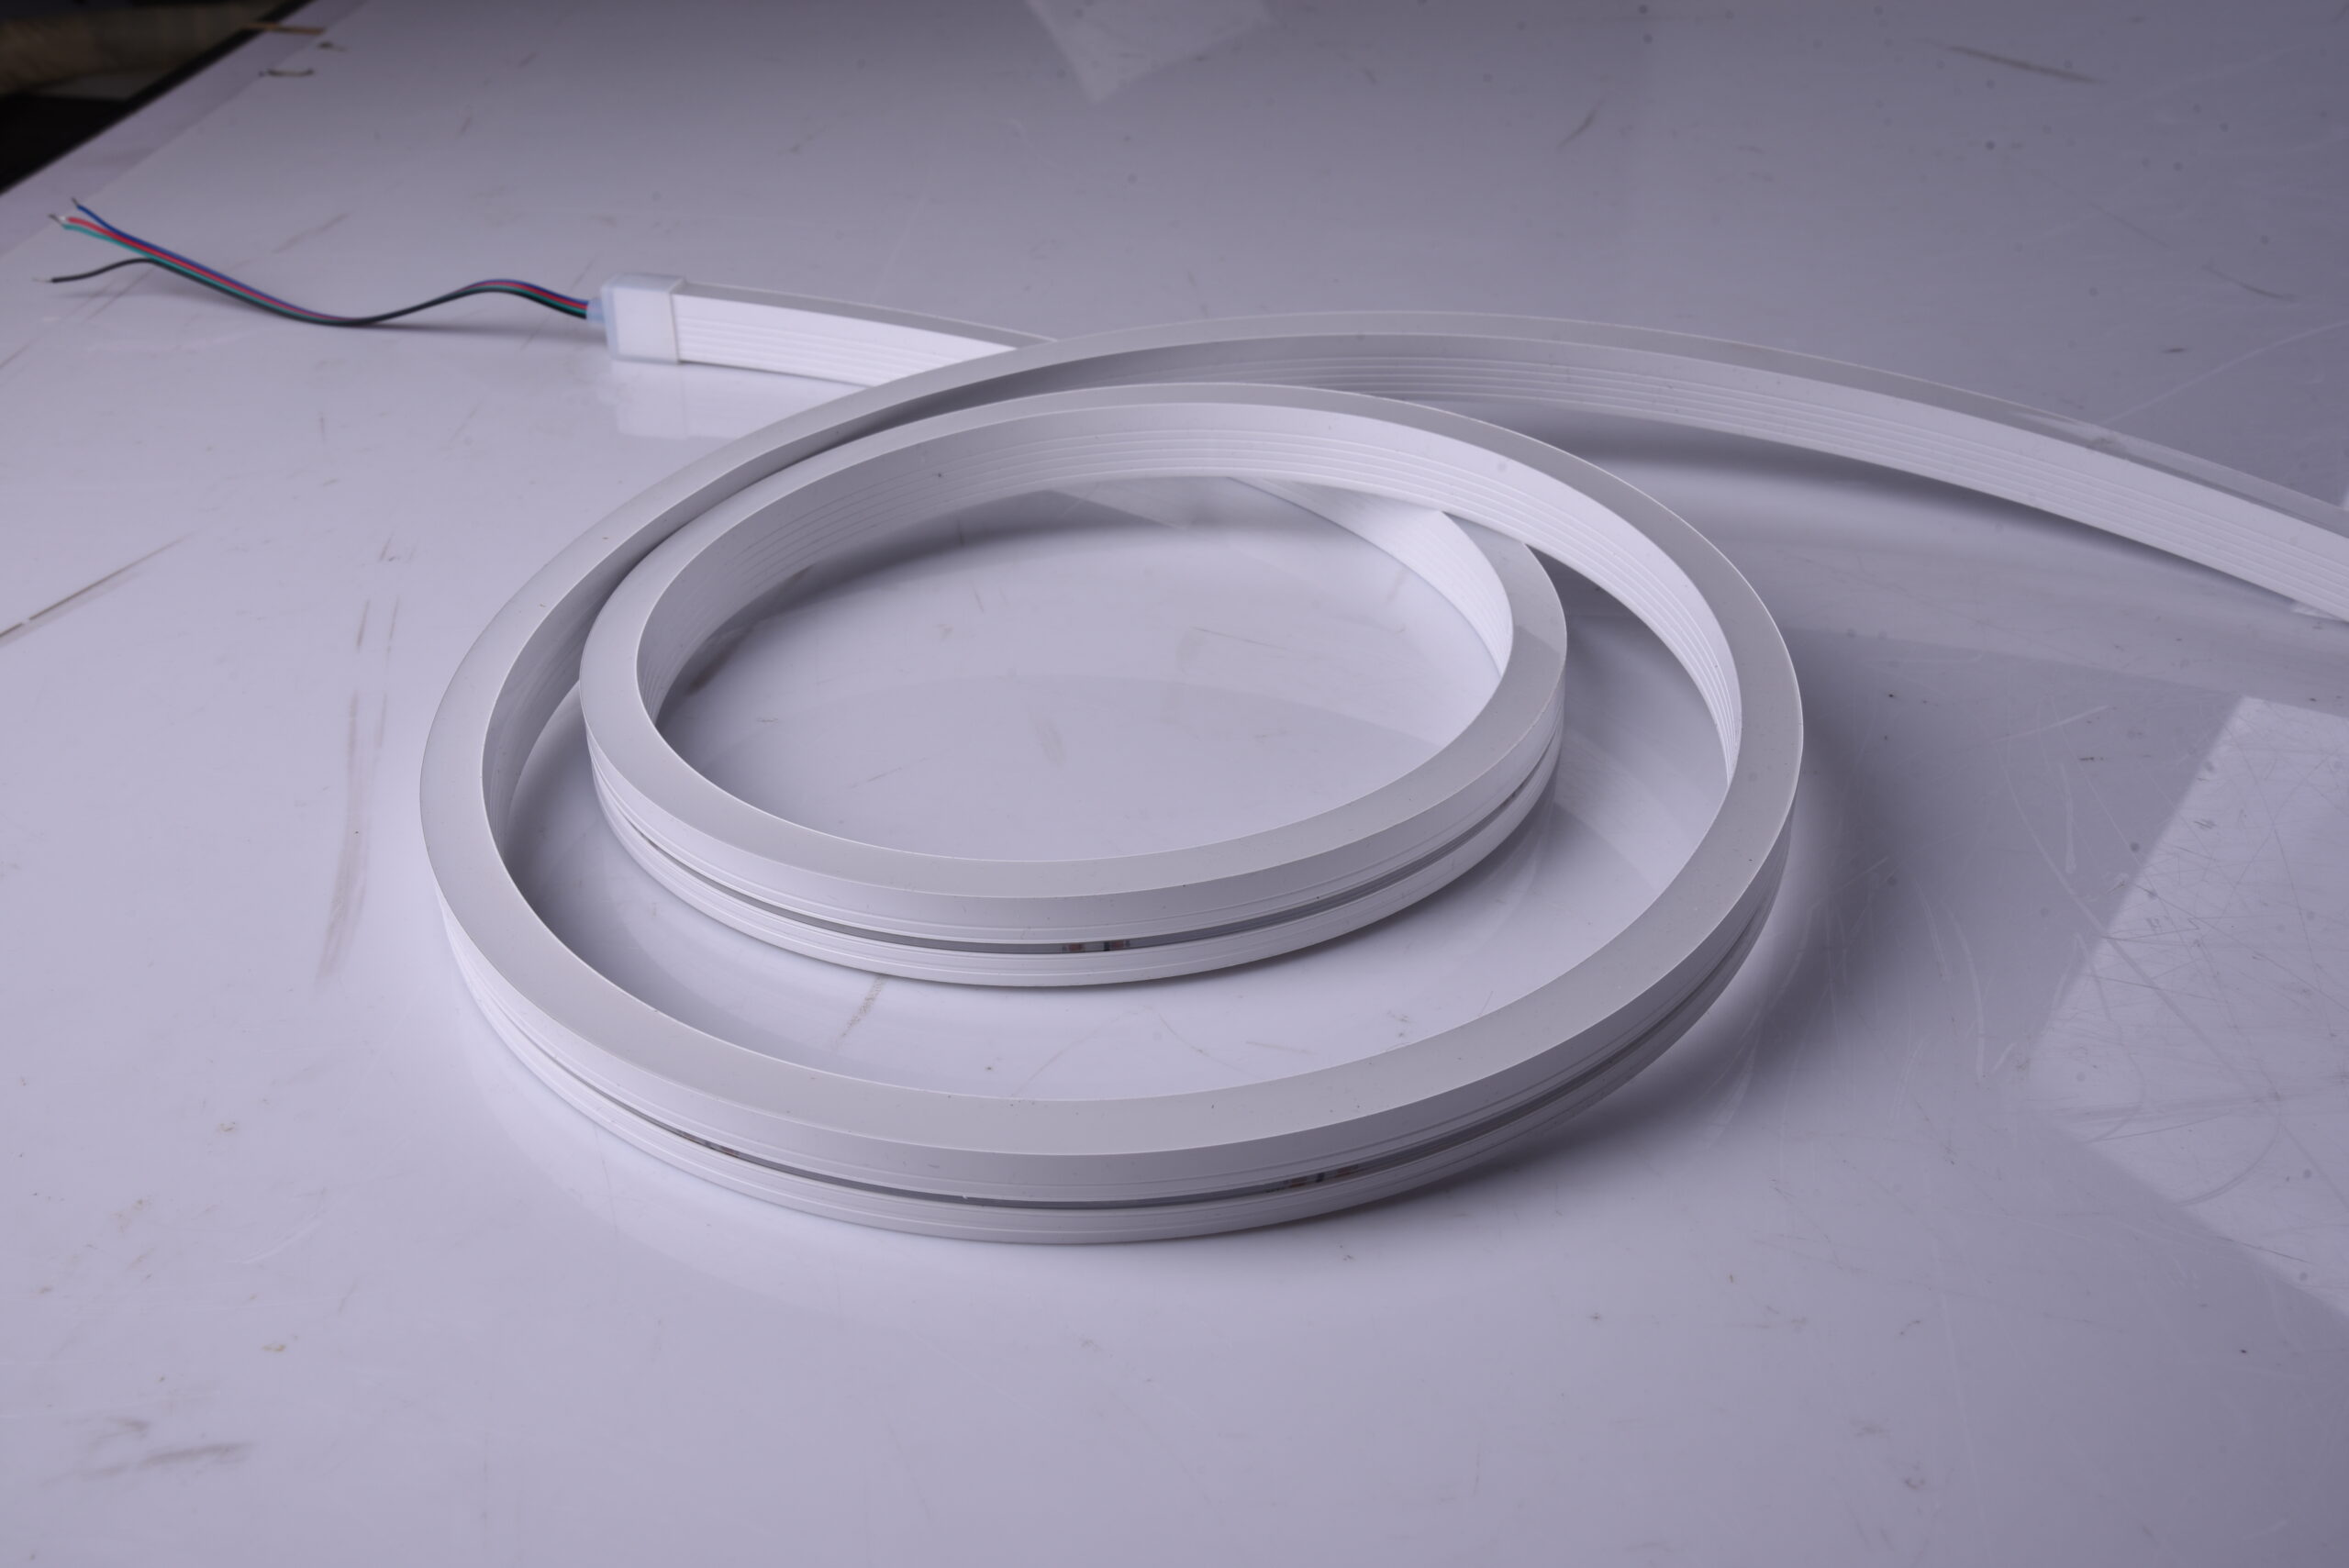 Silicone Led Lights: The Best Choice For Your New Home Or Business?